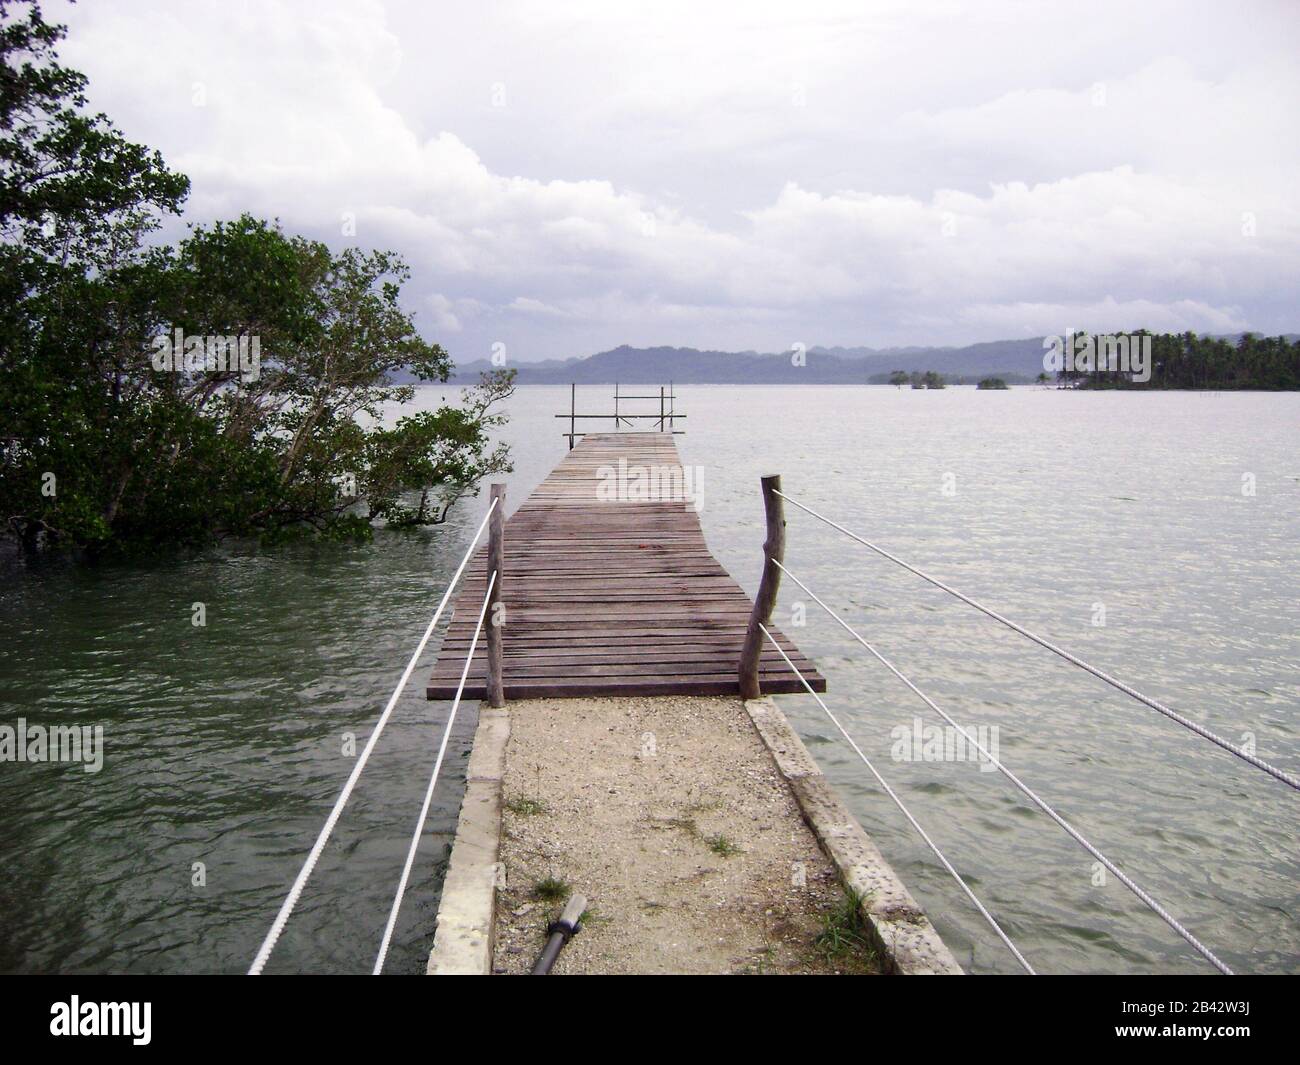 Wooden walkway extending out into the water at a beach in Surigao del Sur, Philippines. Stock Photo